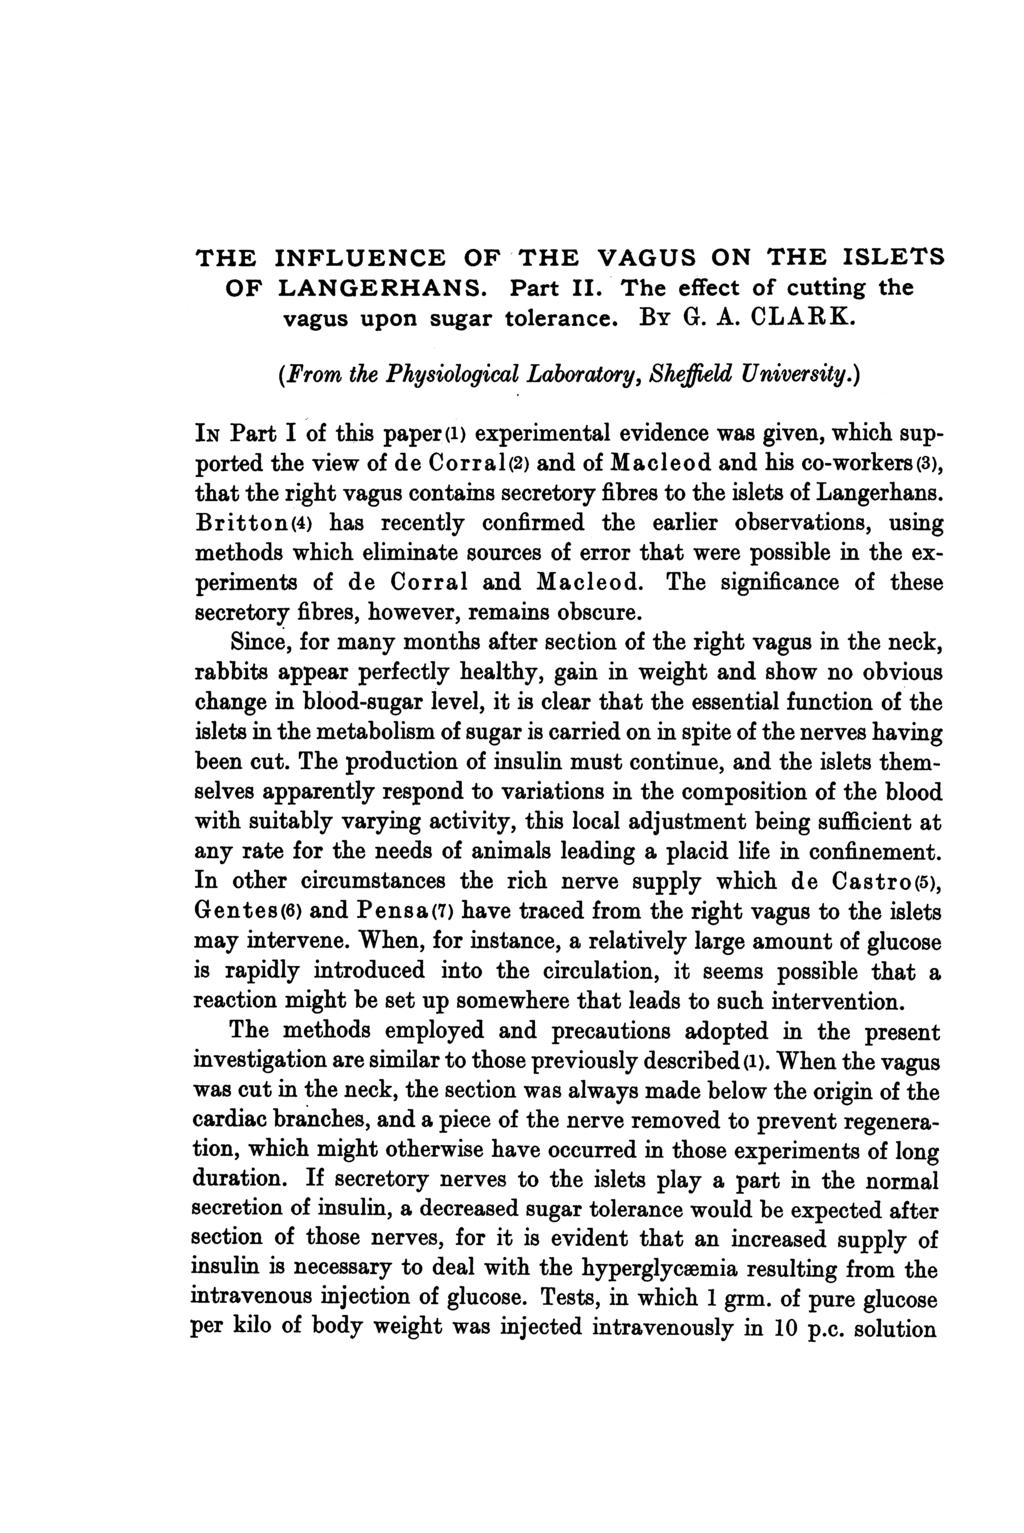 THE INFLUENCE OF THE VAGUS ON THE ISLETS OF LANGERHANS. Part II. The effect of cutting the vagus upon sugar tolerance. BY G. A. CLARK. (From the Physiological Laboratory, Sheffield University.